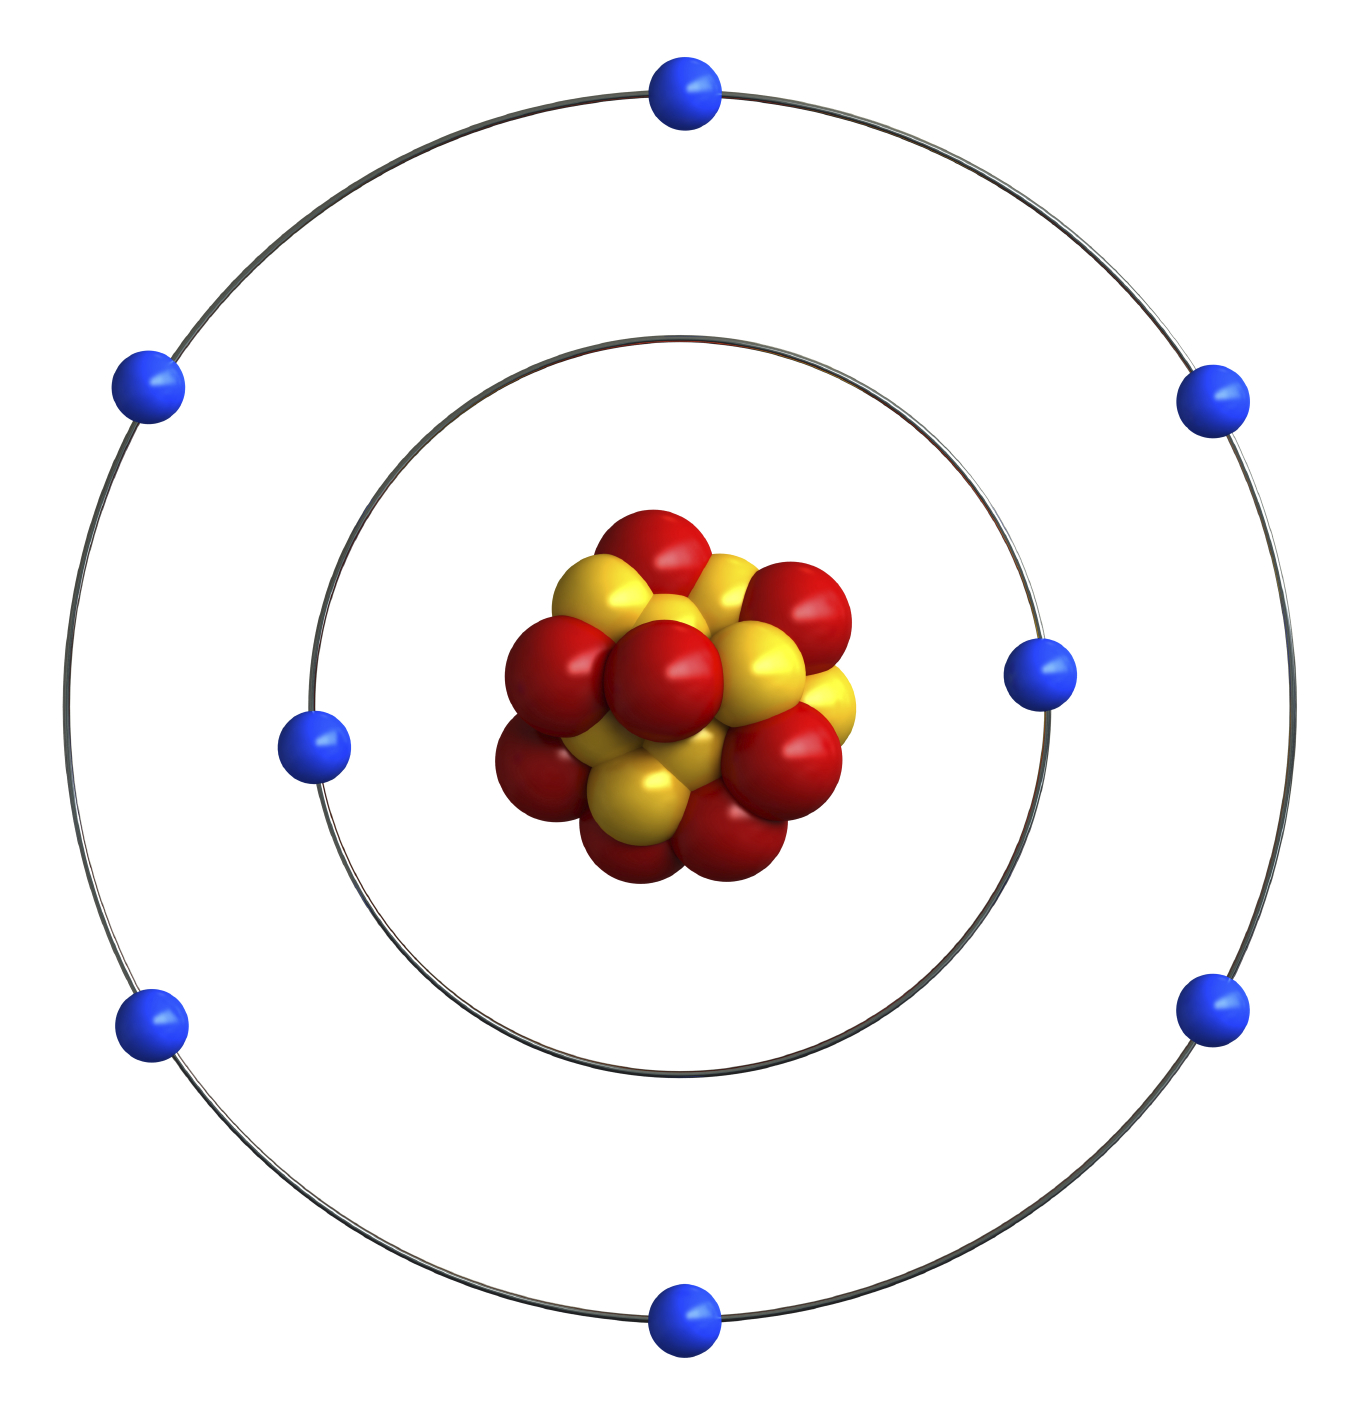 Atomic Structure of Oxygen